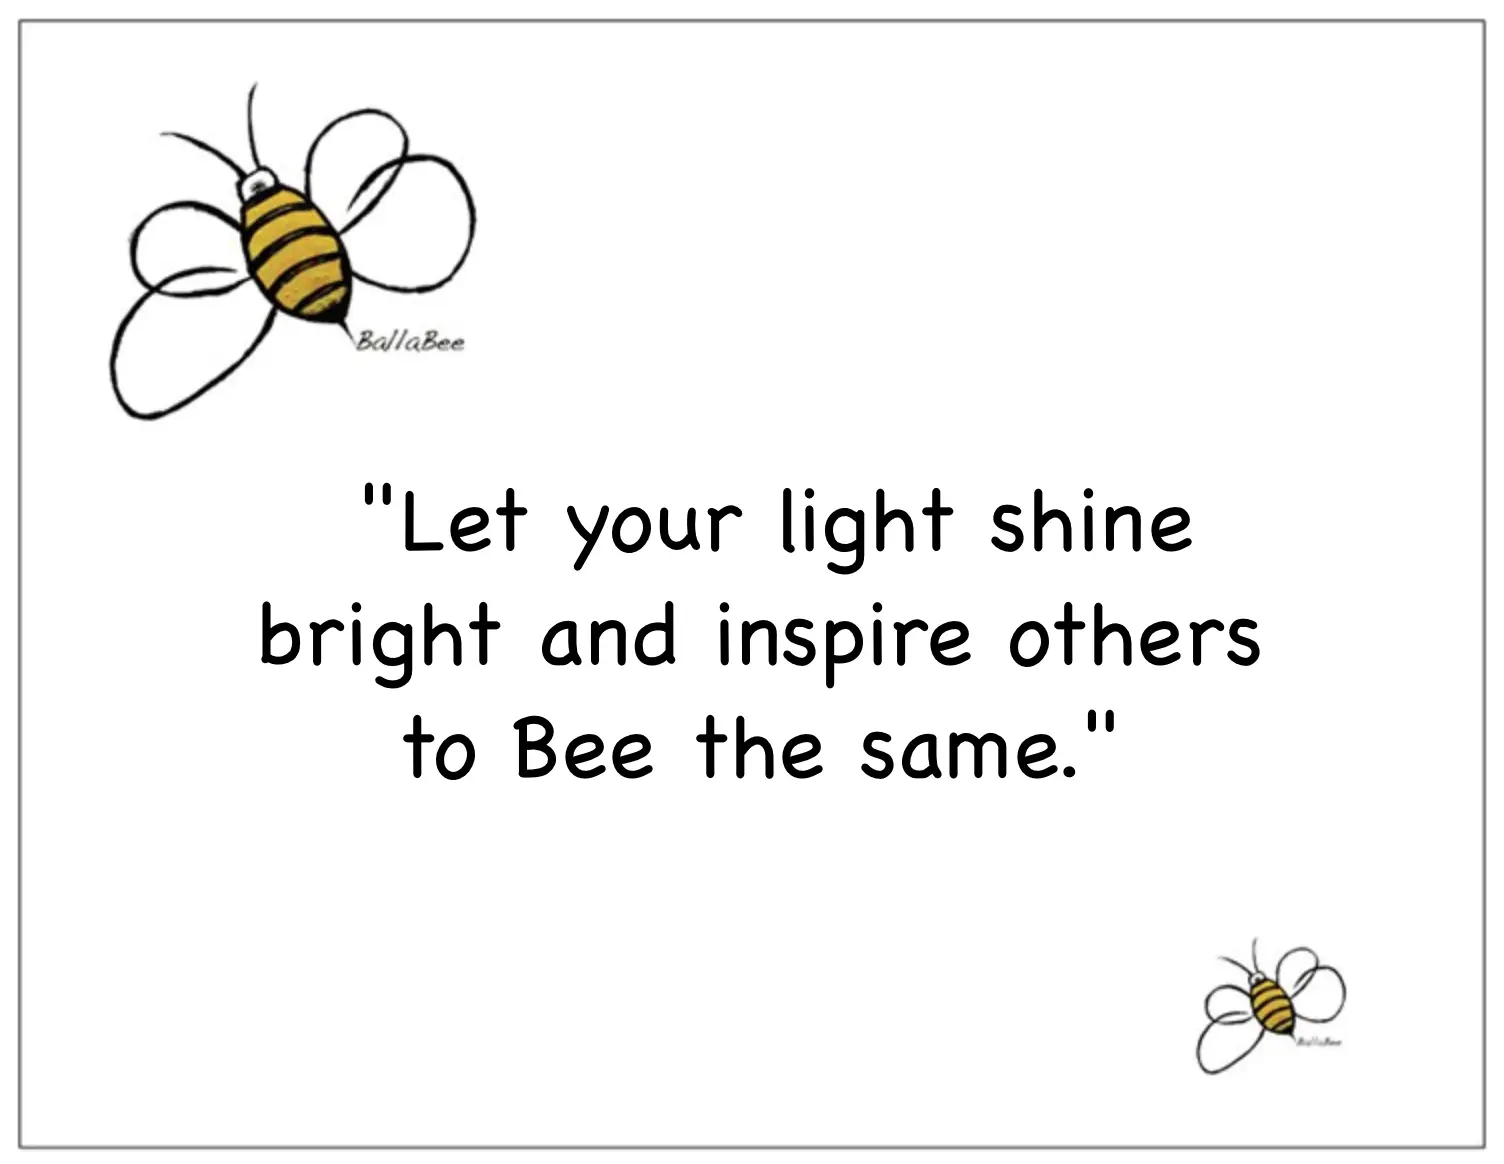 Let your light shine bright and inspire others to do the same